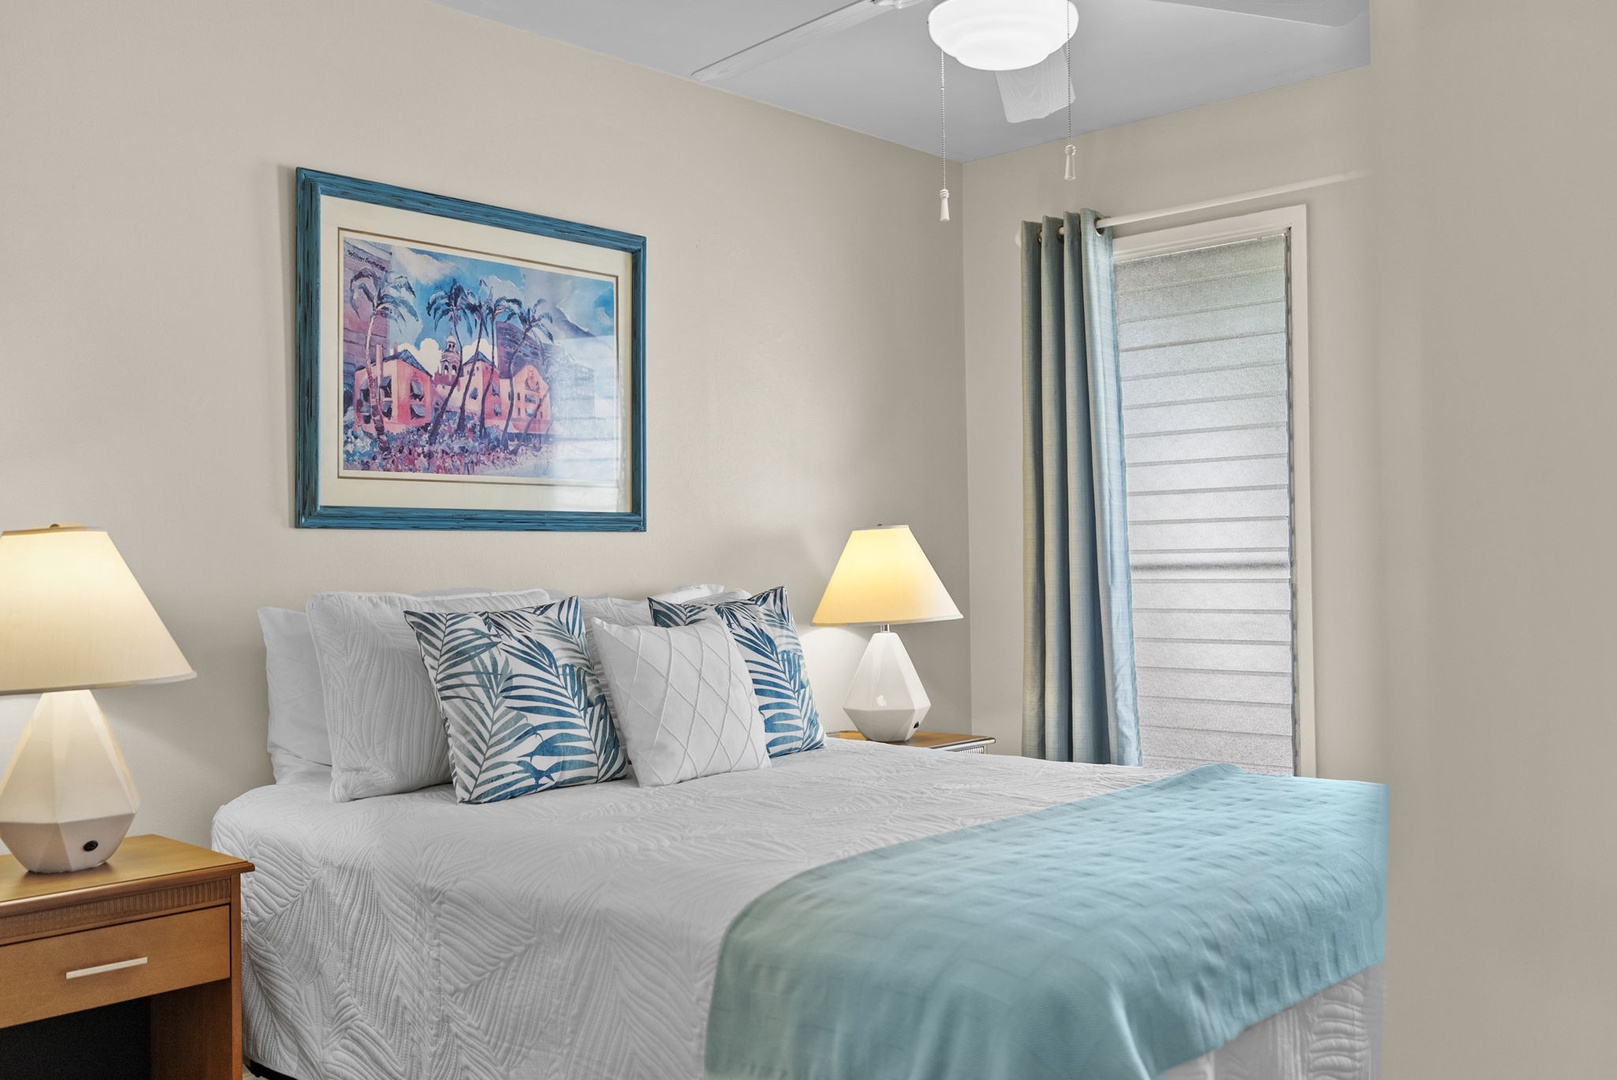 Kailua Vacation Rentals, Hale Aloha - Relax and unwind in the guest suite, designed for coziness with its inviting queen bed and fine linens.